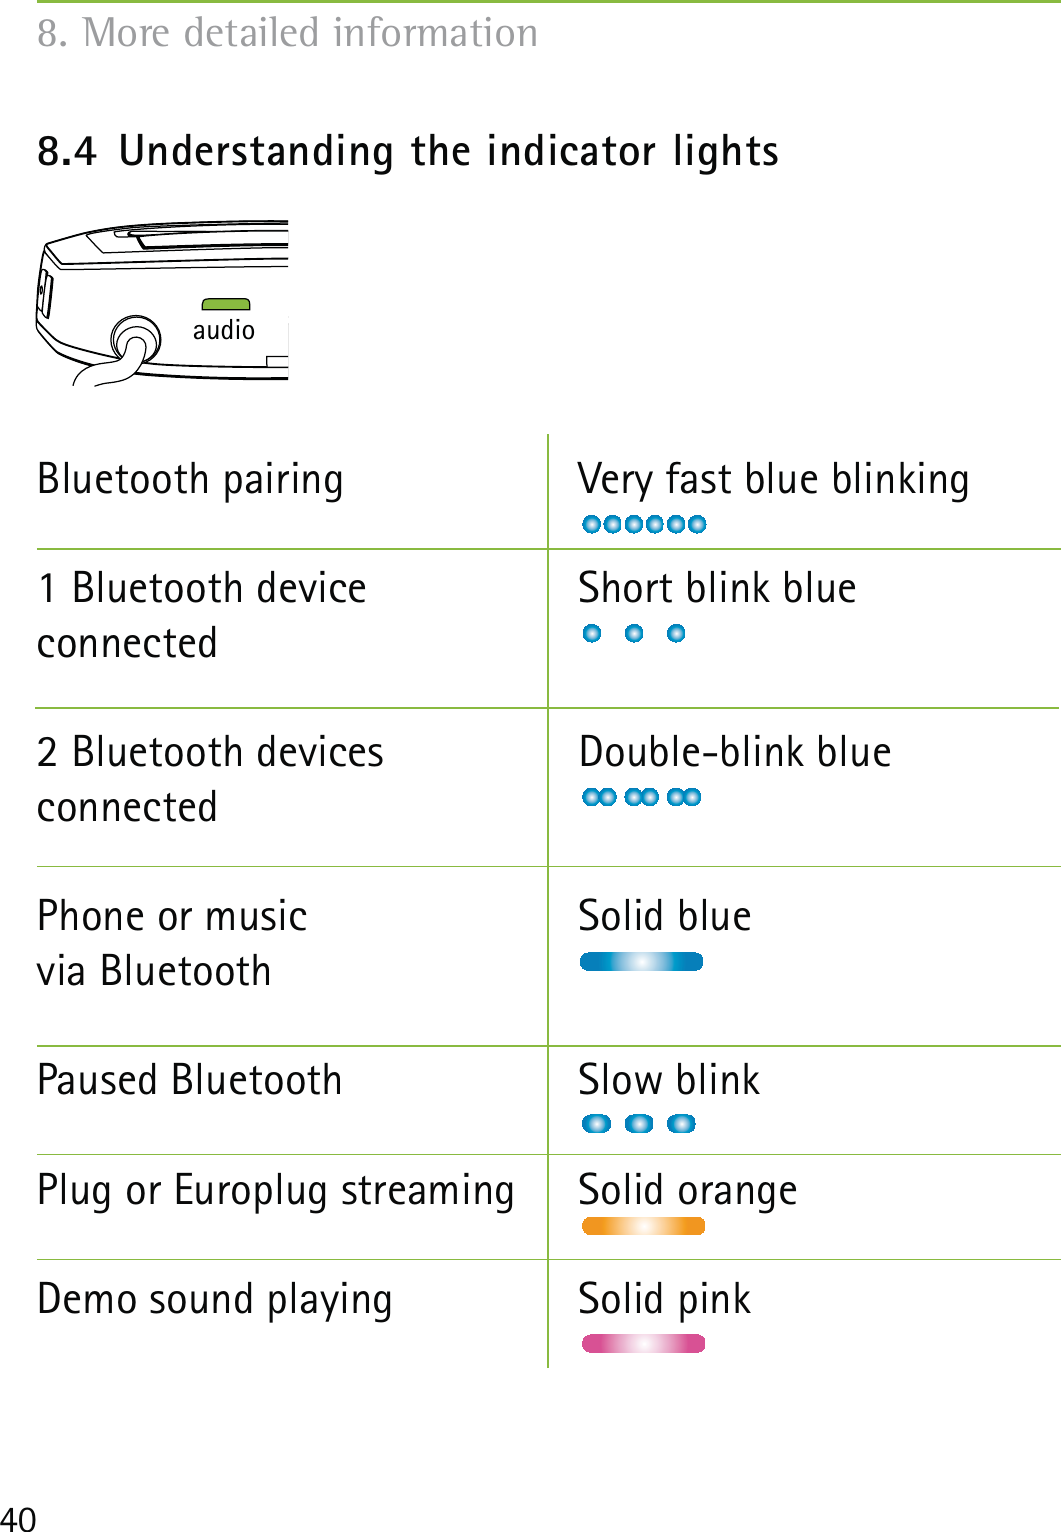 408.4  Understanding the indicator lightsBluetooth pairing  Very fast blue blinking1 Bluetooth device   Short blink blue connected 2 Bluetooth devices   Double-blink blue connected Phone or music  Solid blue via Bluetooth Paused Bluetooth  Slow blinkPlug or Europlug streaming  Solid orange Demo sound playing  Solid pinkaudio8. More detailed information